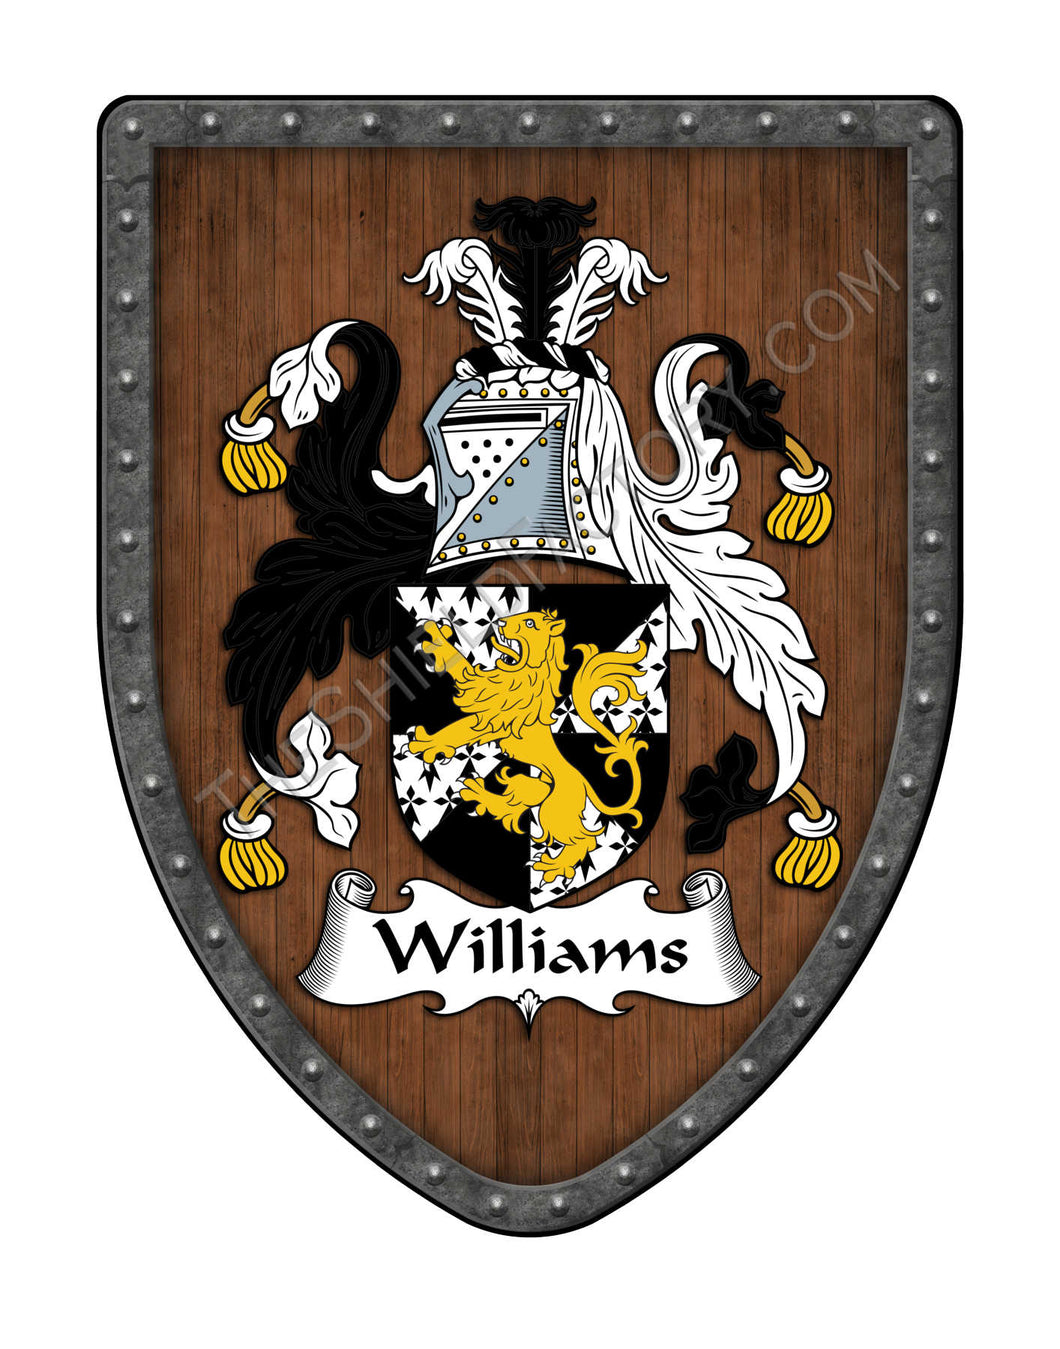 Williams Coat of Arms Family Crest